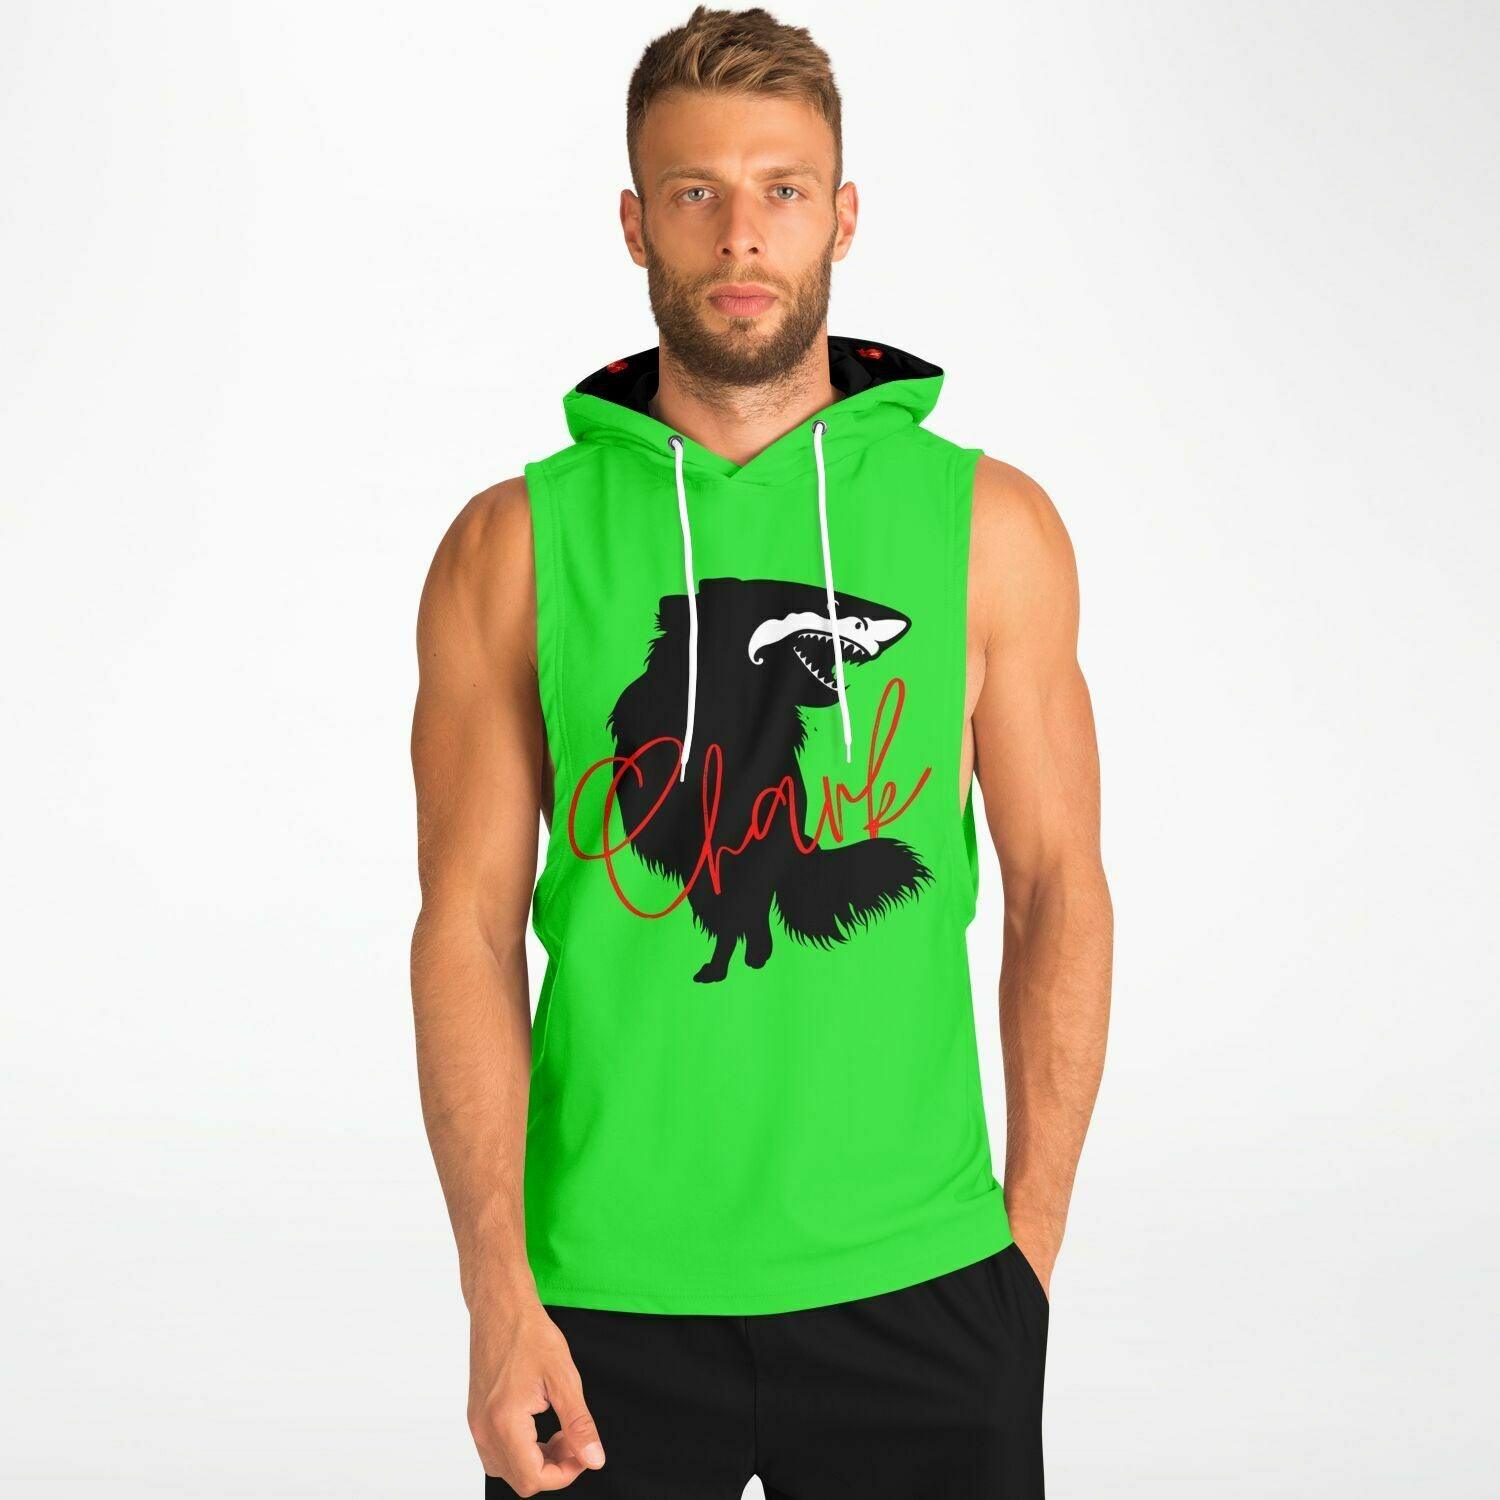 Chark punky green sleeveless hoodie. Front: black chihuahua with the face of a great white shark - mouth open to show off jaws lined with sharp white teeth, with "Chark" in red cursive font. Back: another shark-faced chi and a "dictionary entry" of the noun "chark": a chihuahua with teeth like a shark. Contrasting hoodie inner: Black with red Chimigos logos. So cool! Sporty bodybuilder style drop armholes. 95% recycled polyester. Sizes XS - 4XL. Design by Renate Kriegler for Chimigos.